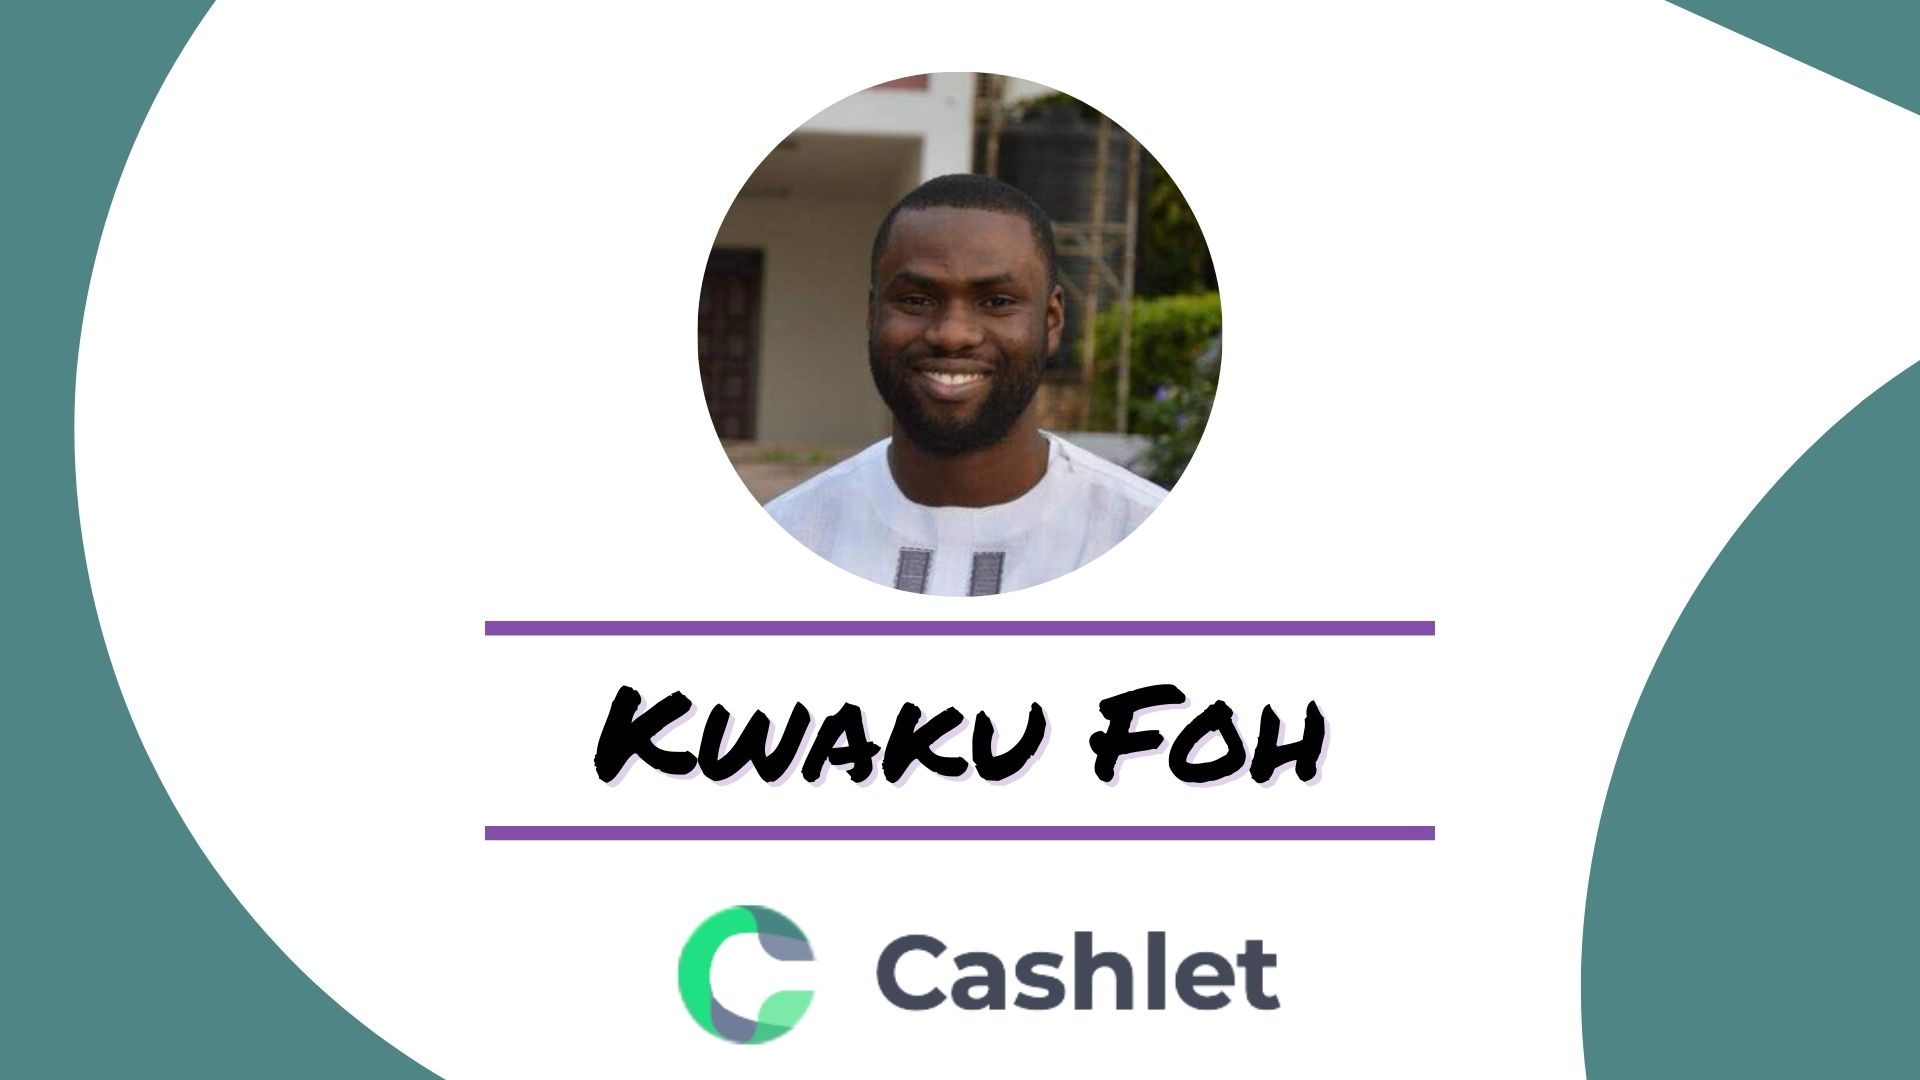 Changing Kenya's saving culture; A conversation with Cashlet App Co-Founder, Kwaku Foh